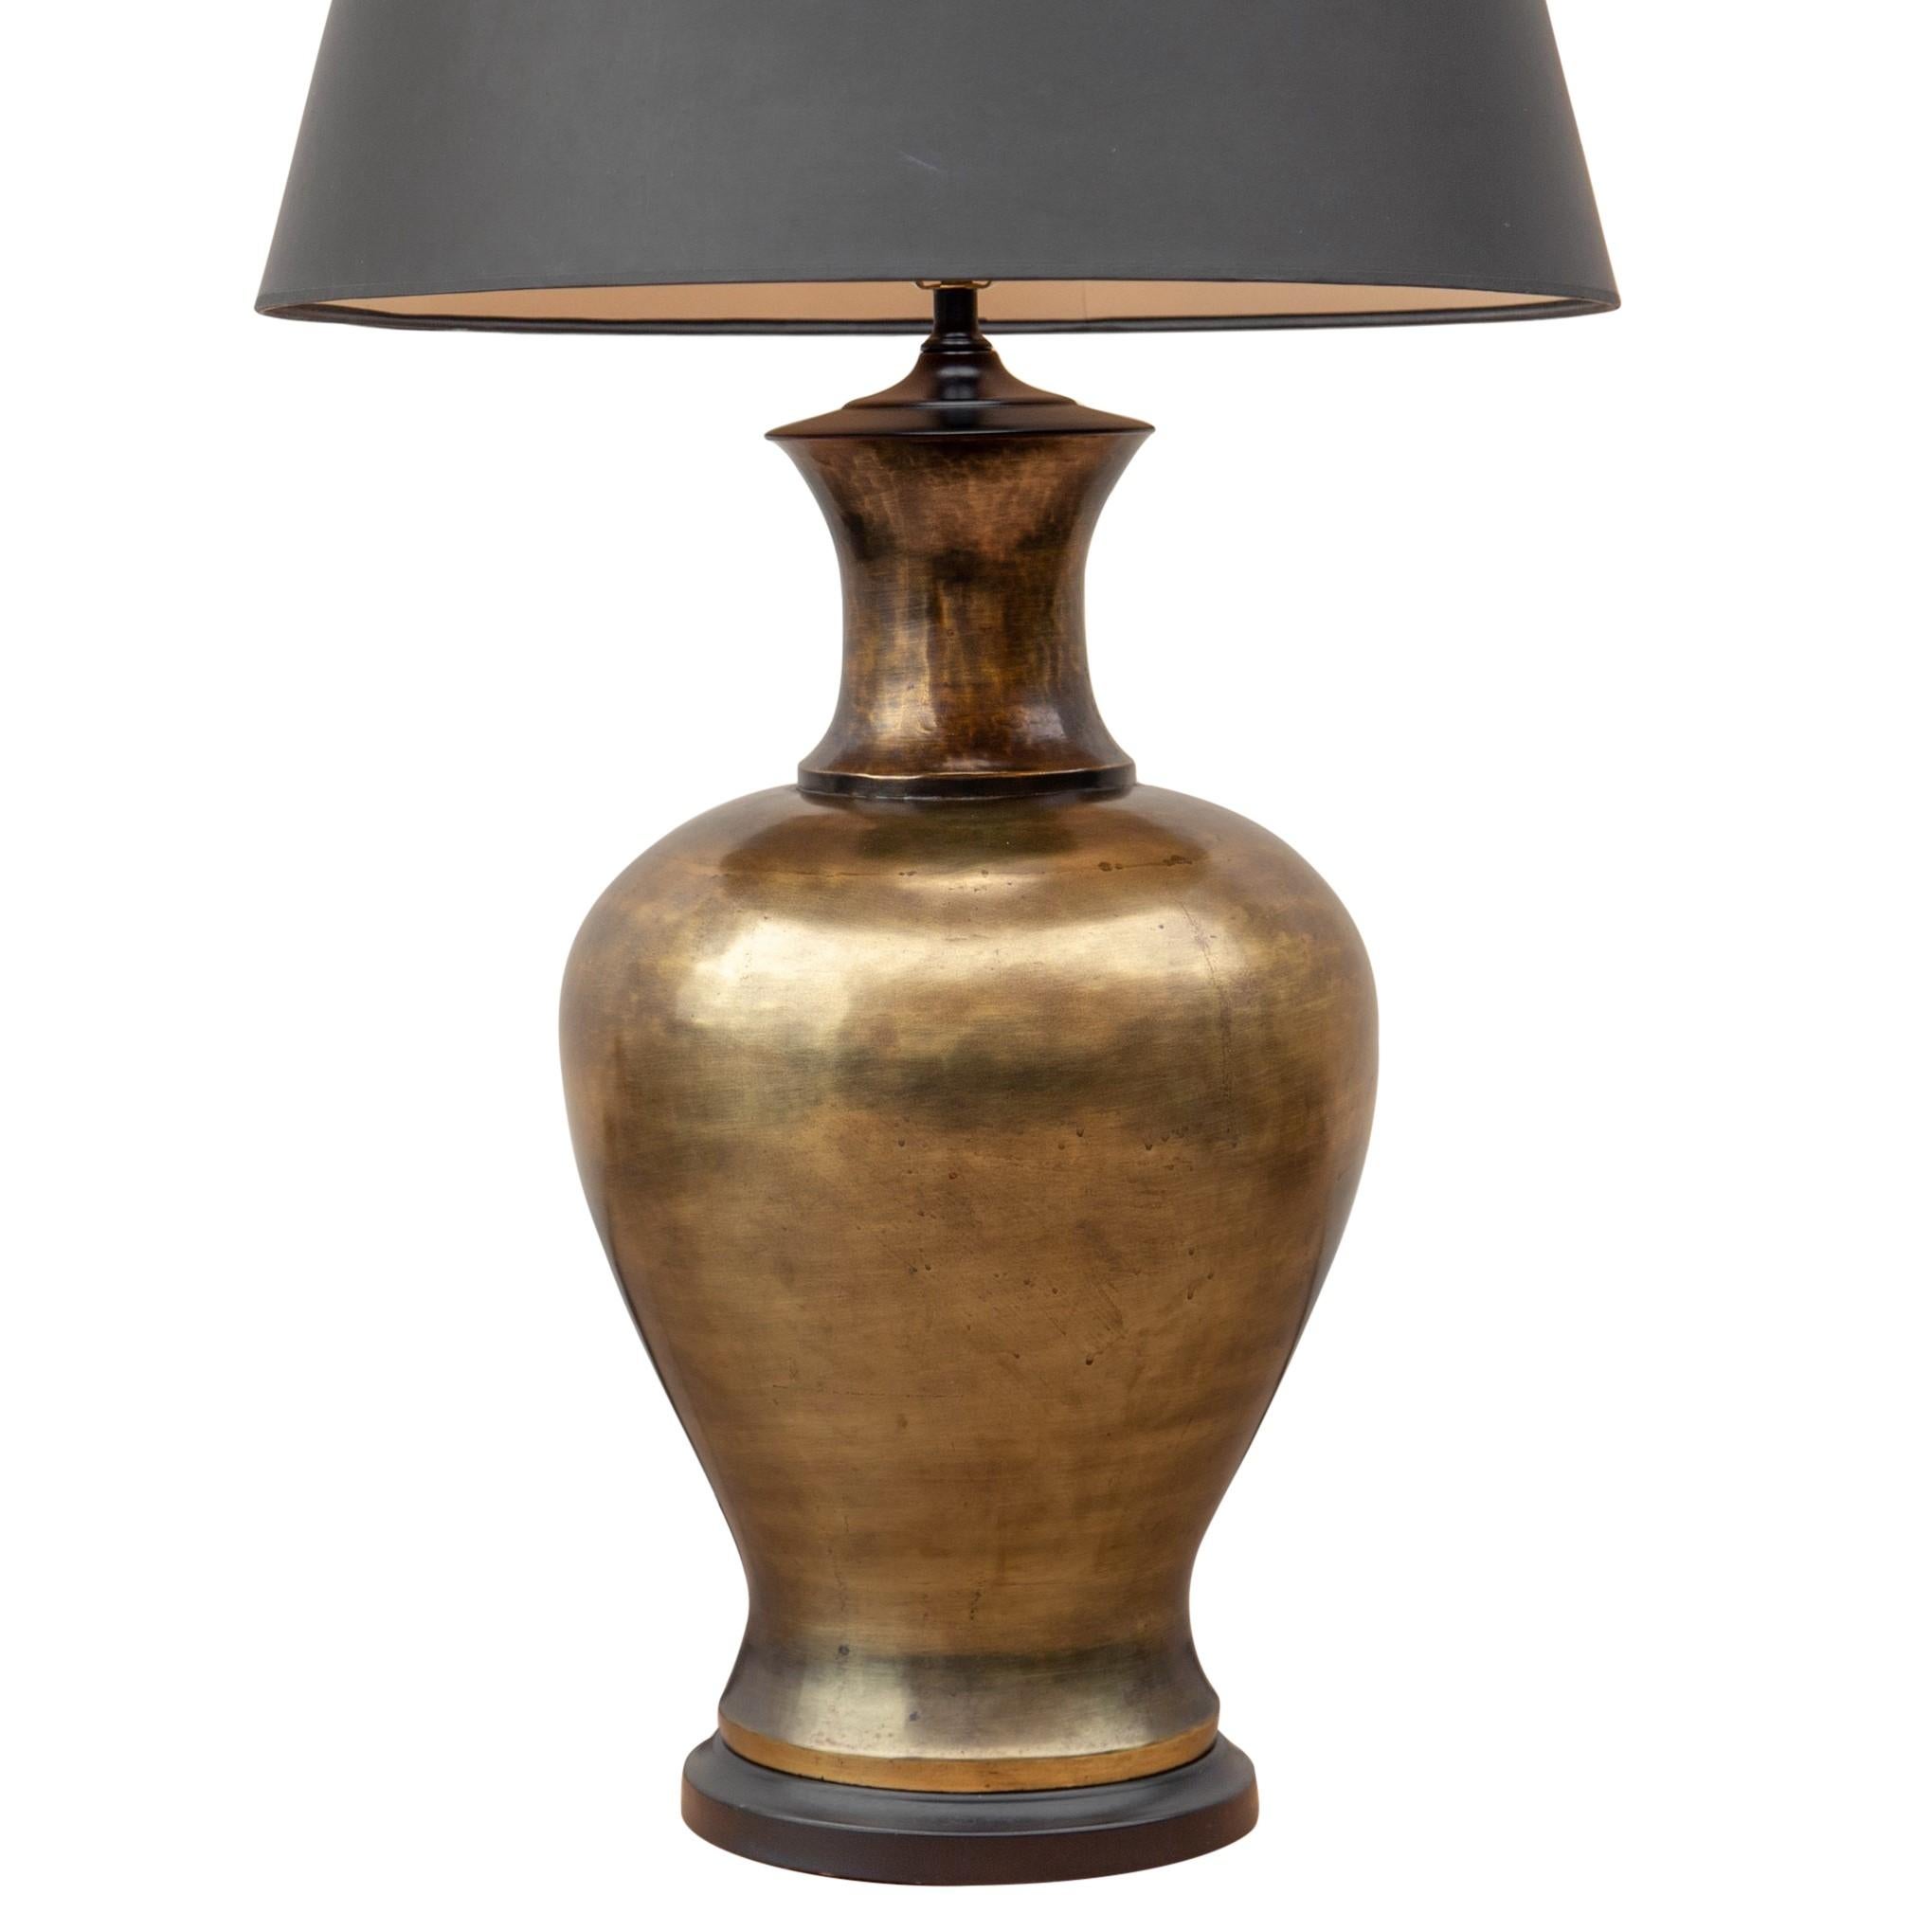 Large-scale solid brass urn-form lamp with black shade by Tyndale, a division of Frederick Cooper, circa 1960s. Original black Empire shade and black painted brass ball finial. The brass urn sits on a painted black brass base and measures 13